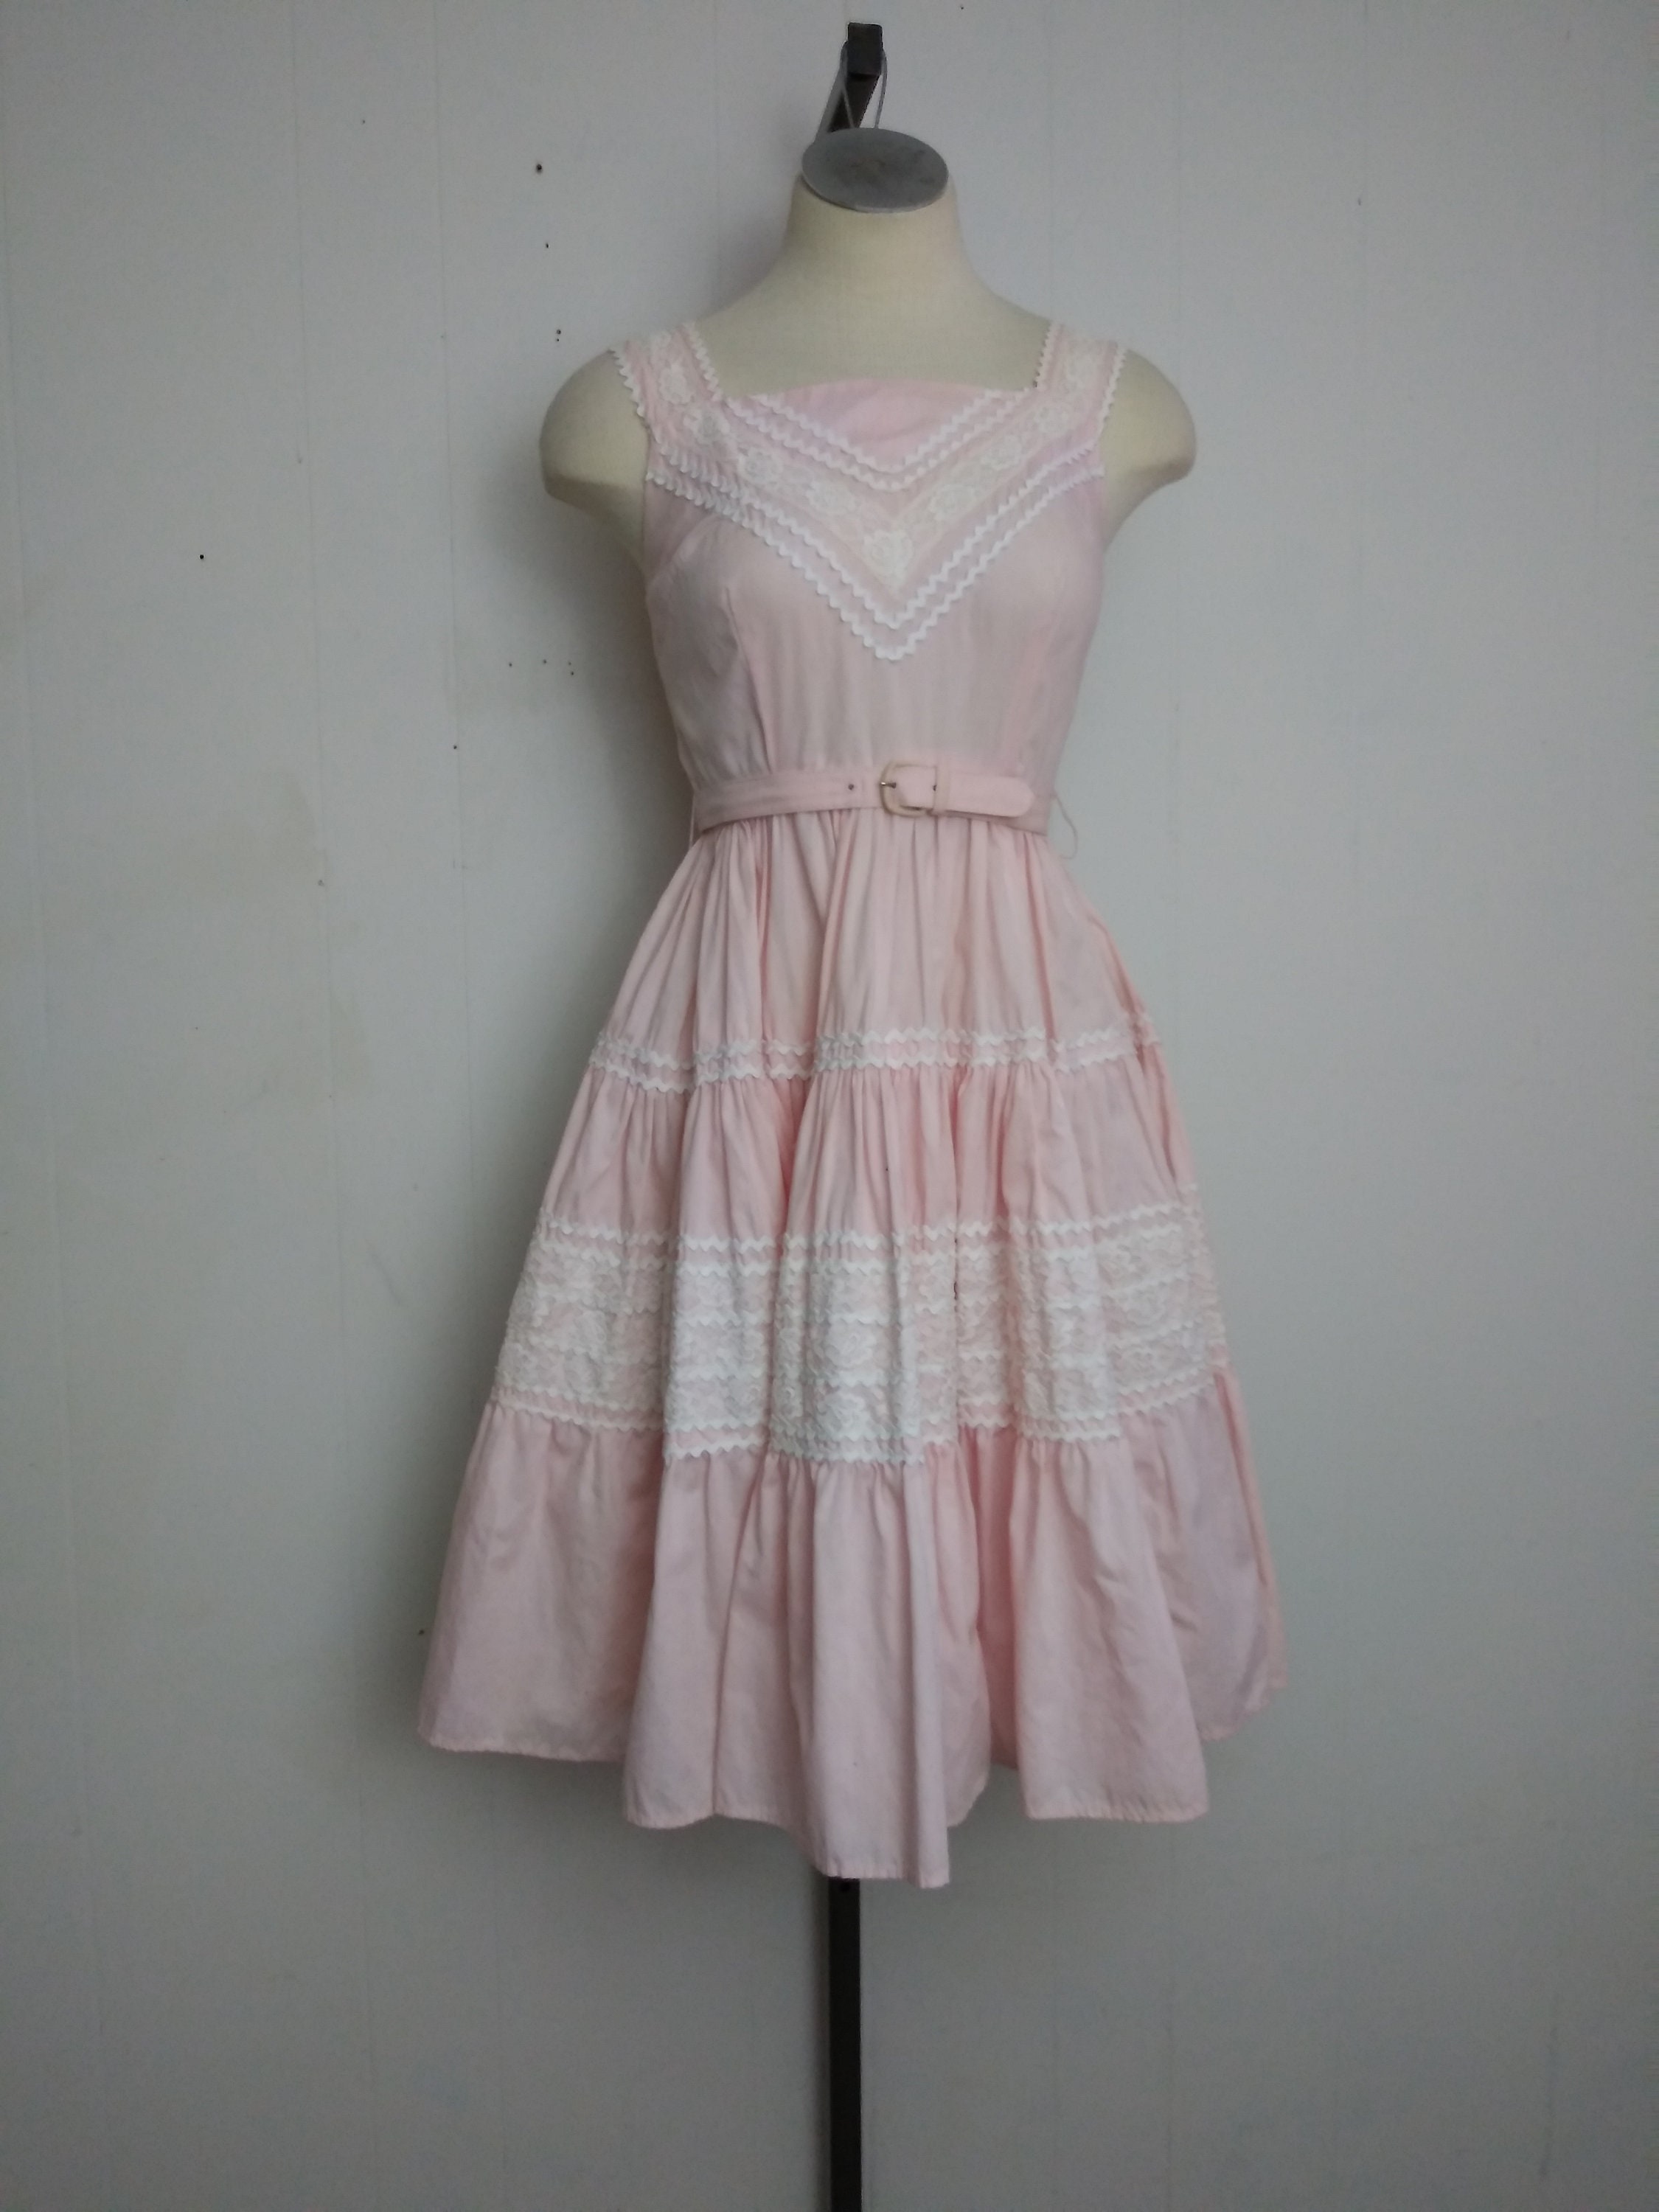 Vintage 50s Dress 1950s Fit and Flare Full Circle Skirt Pink - Etsy